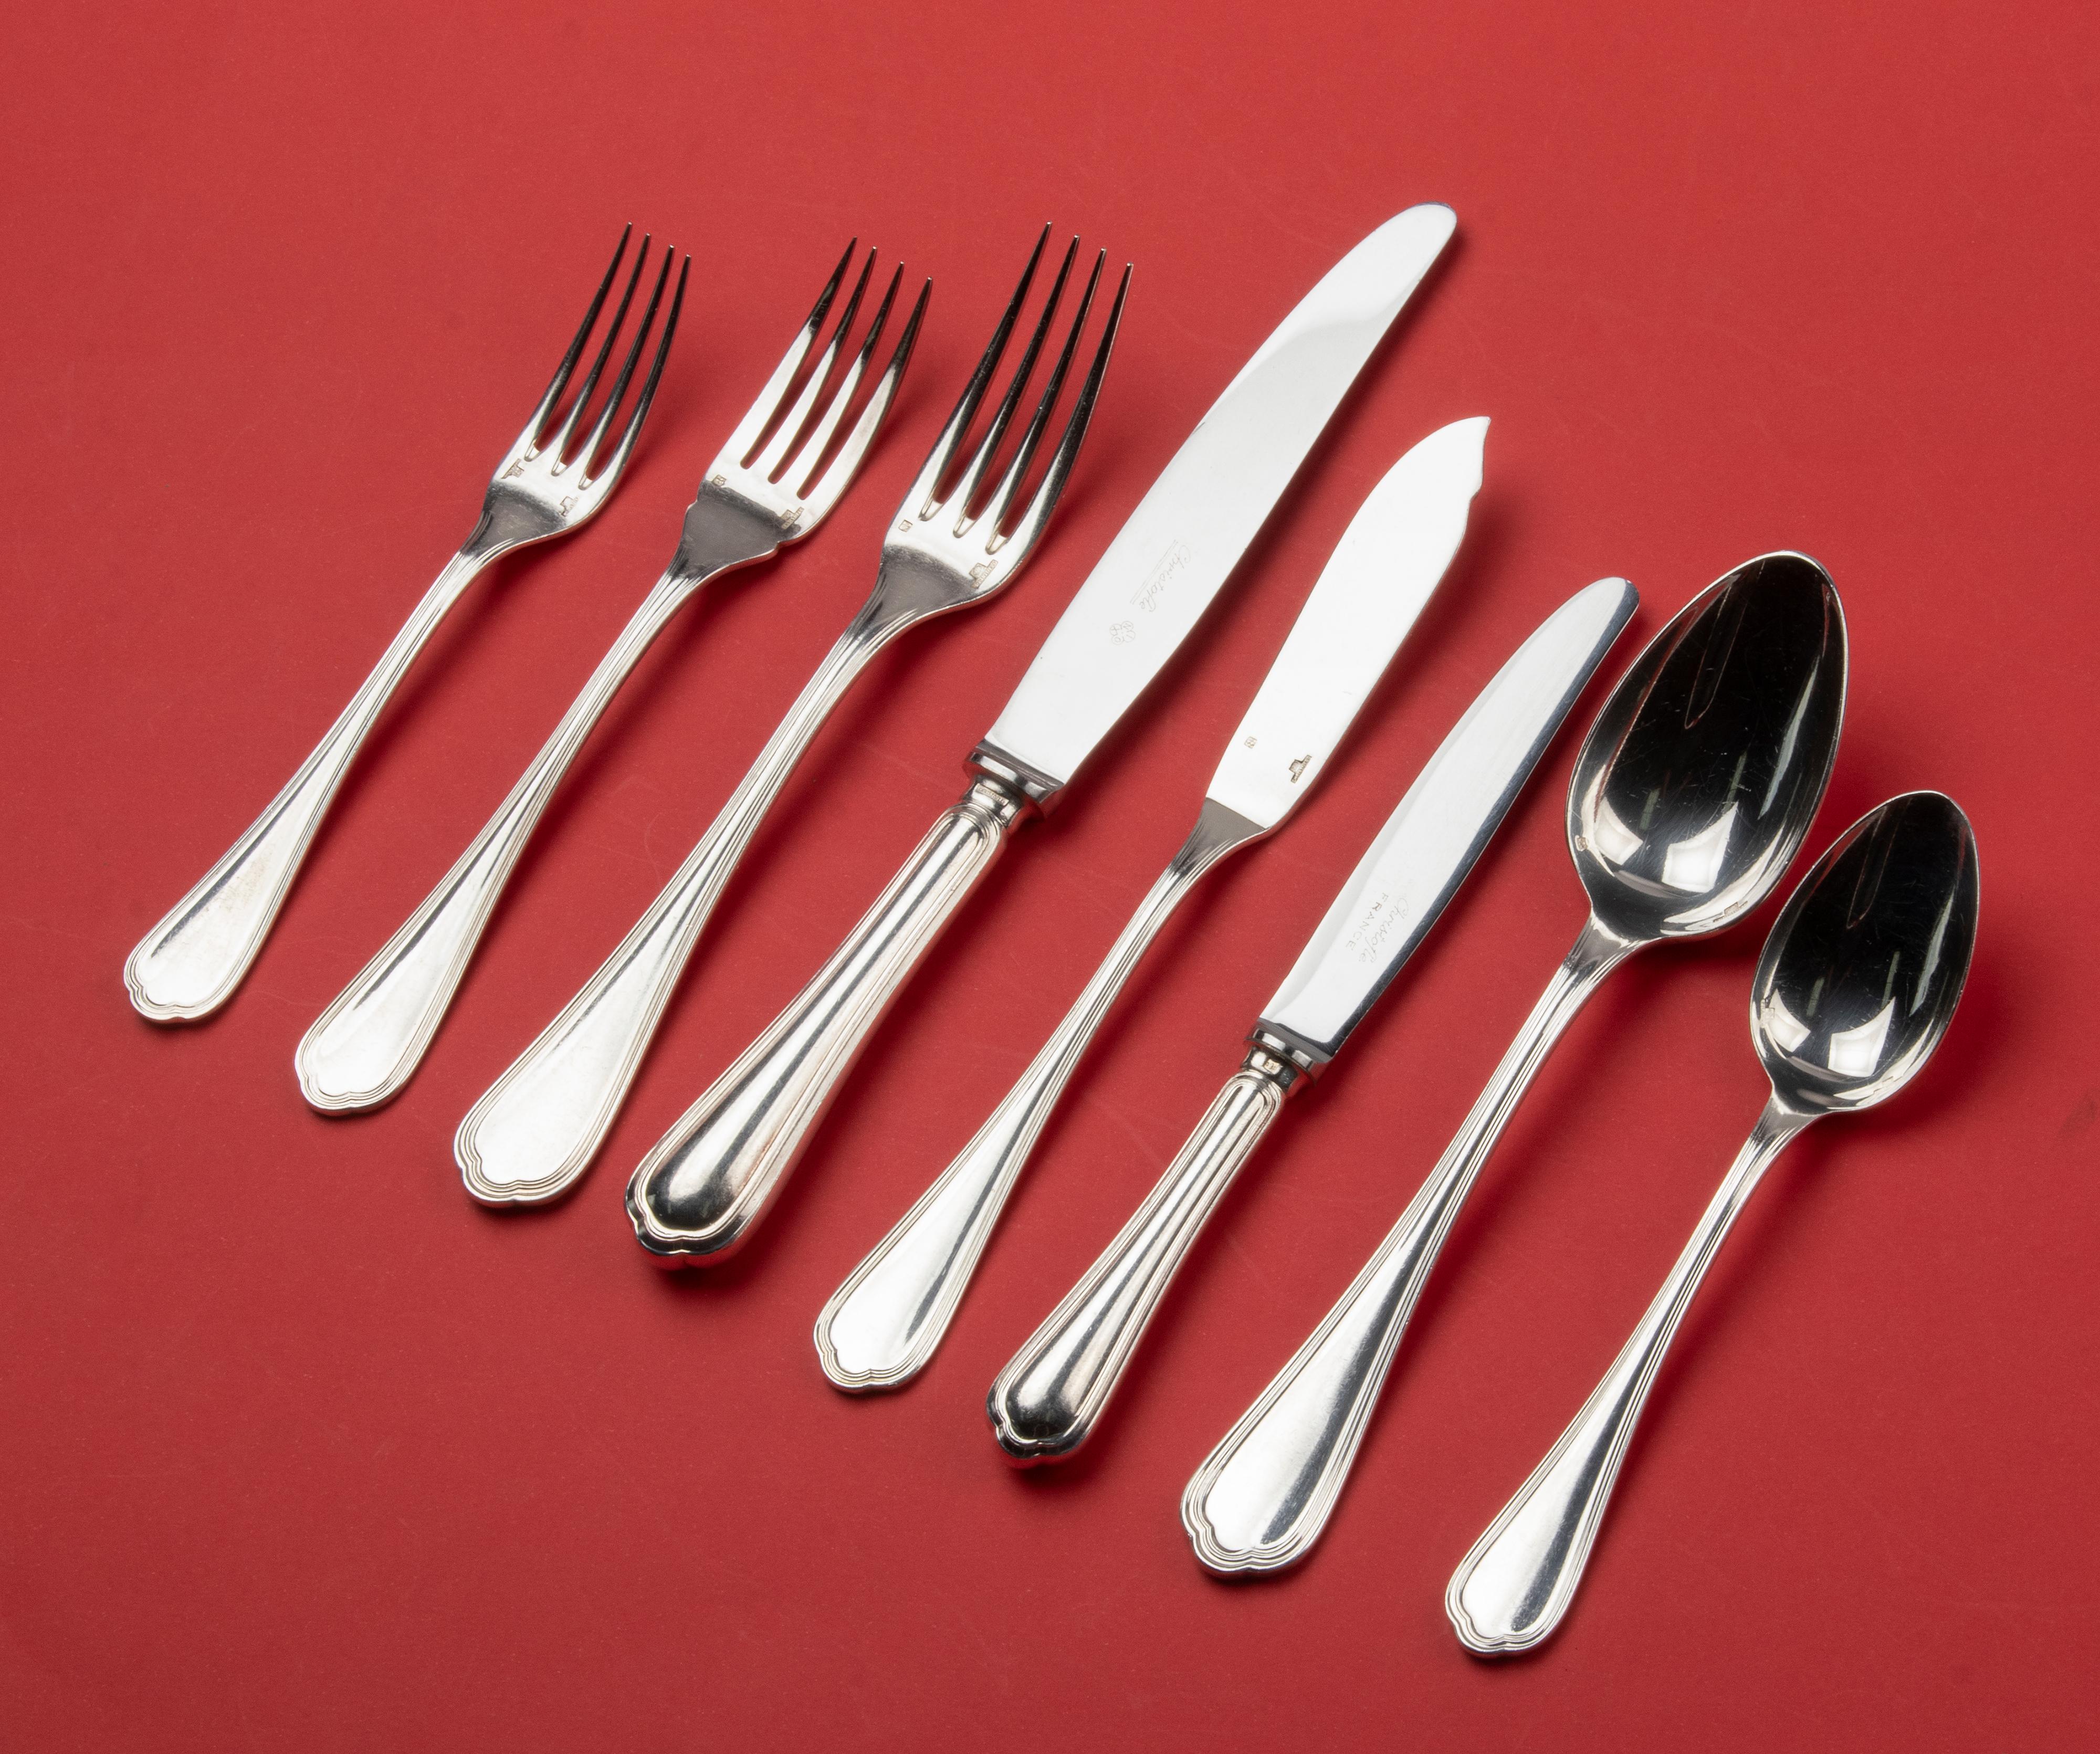 Beautiful set of silver plated flatware for 12 persons from the French brand Christofle. The name of this model is Spatours. The set contains the following pieces: 12 table forks, 12 table knives, 12 table spoons, 12 lunch forks, 12 lunch knives, 12